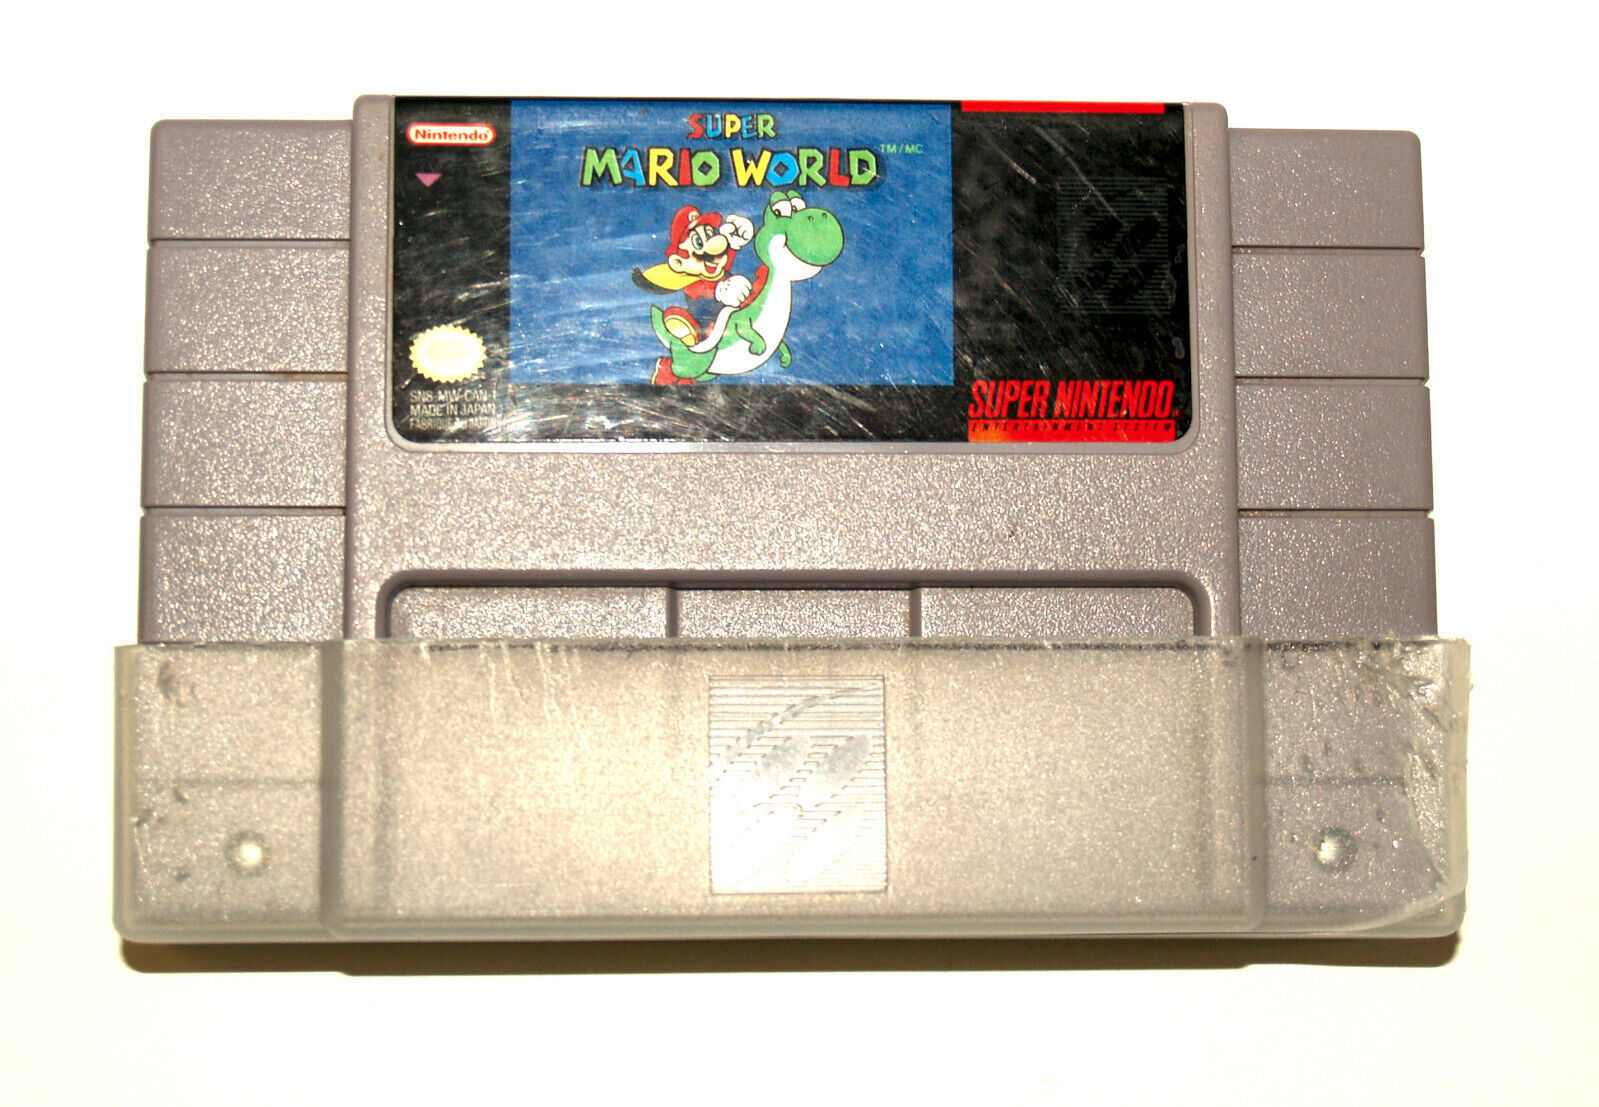 Primary image for Super Mario World (Nintendo SNES, 1992) SNS-MW-CAN-1 Game Cartridge